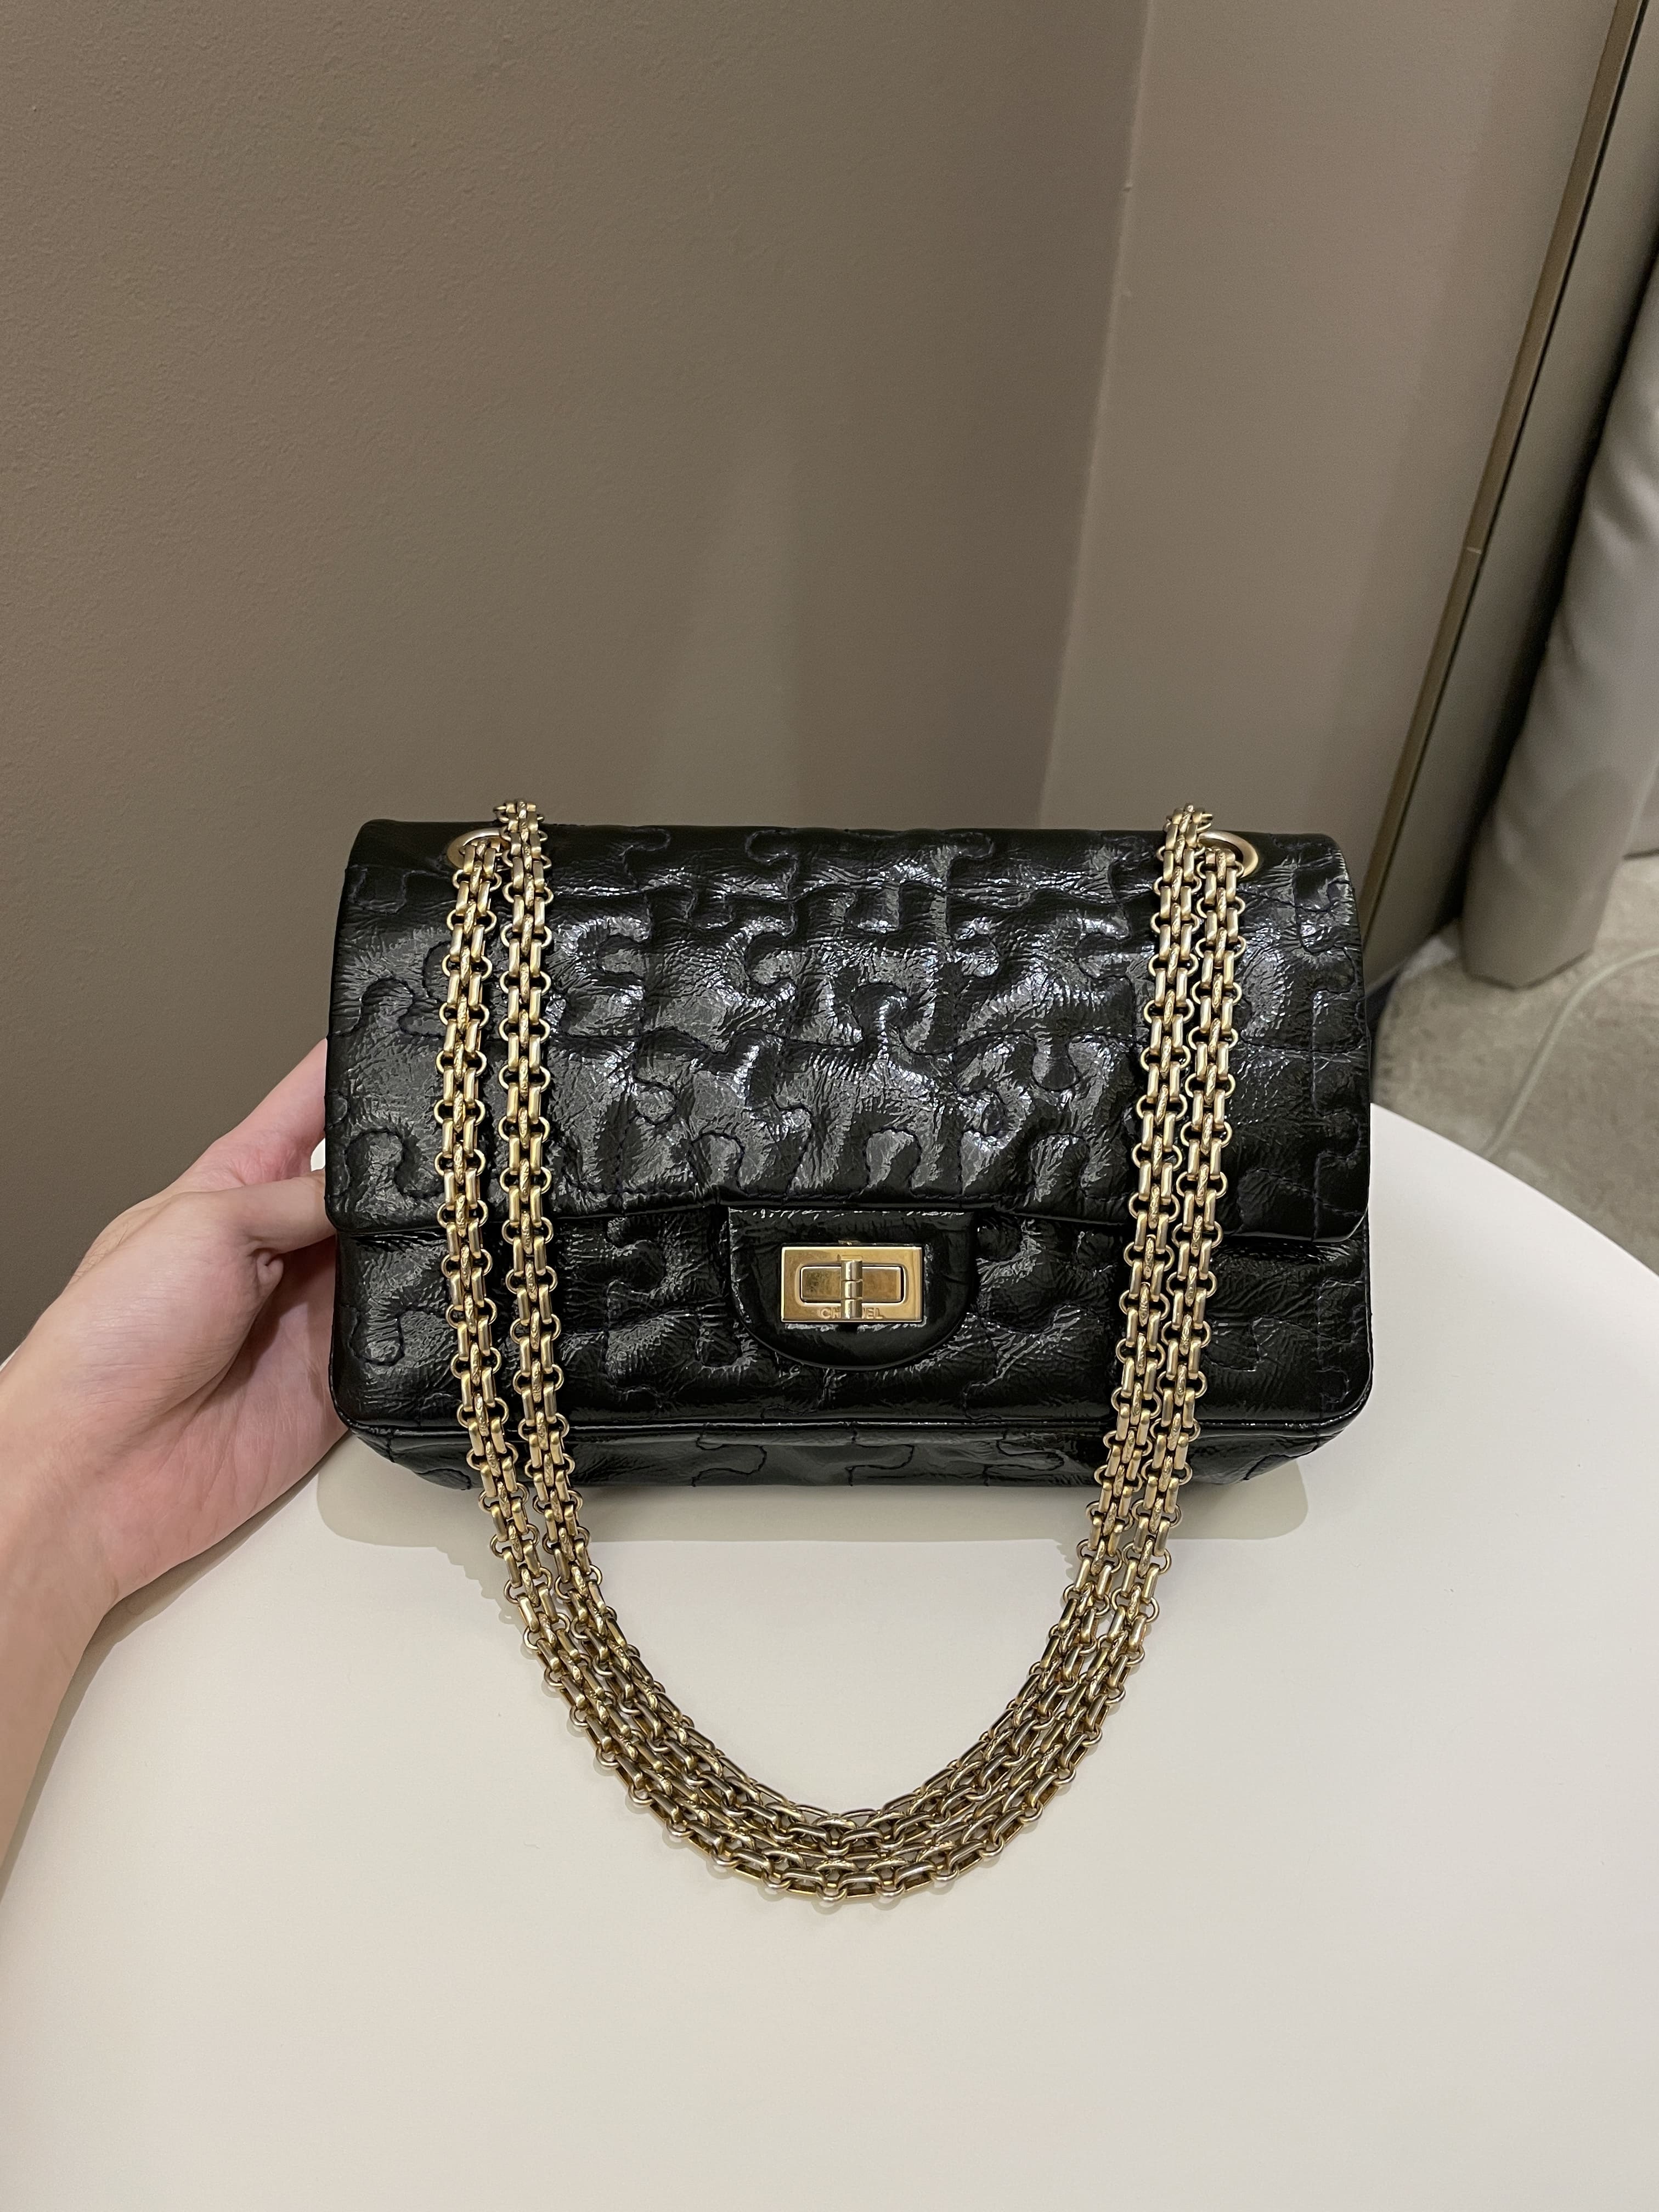 Snag the Latest CHANEL Blue Patent Bags & Handbags for Women with Fast and  Free Shipping. Authenticity Guaranteed on Designer Handbags $500+ at .